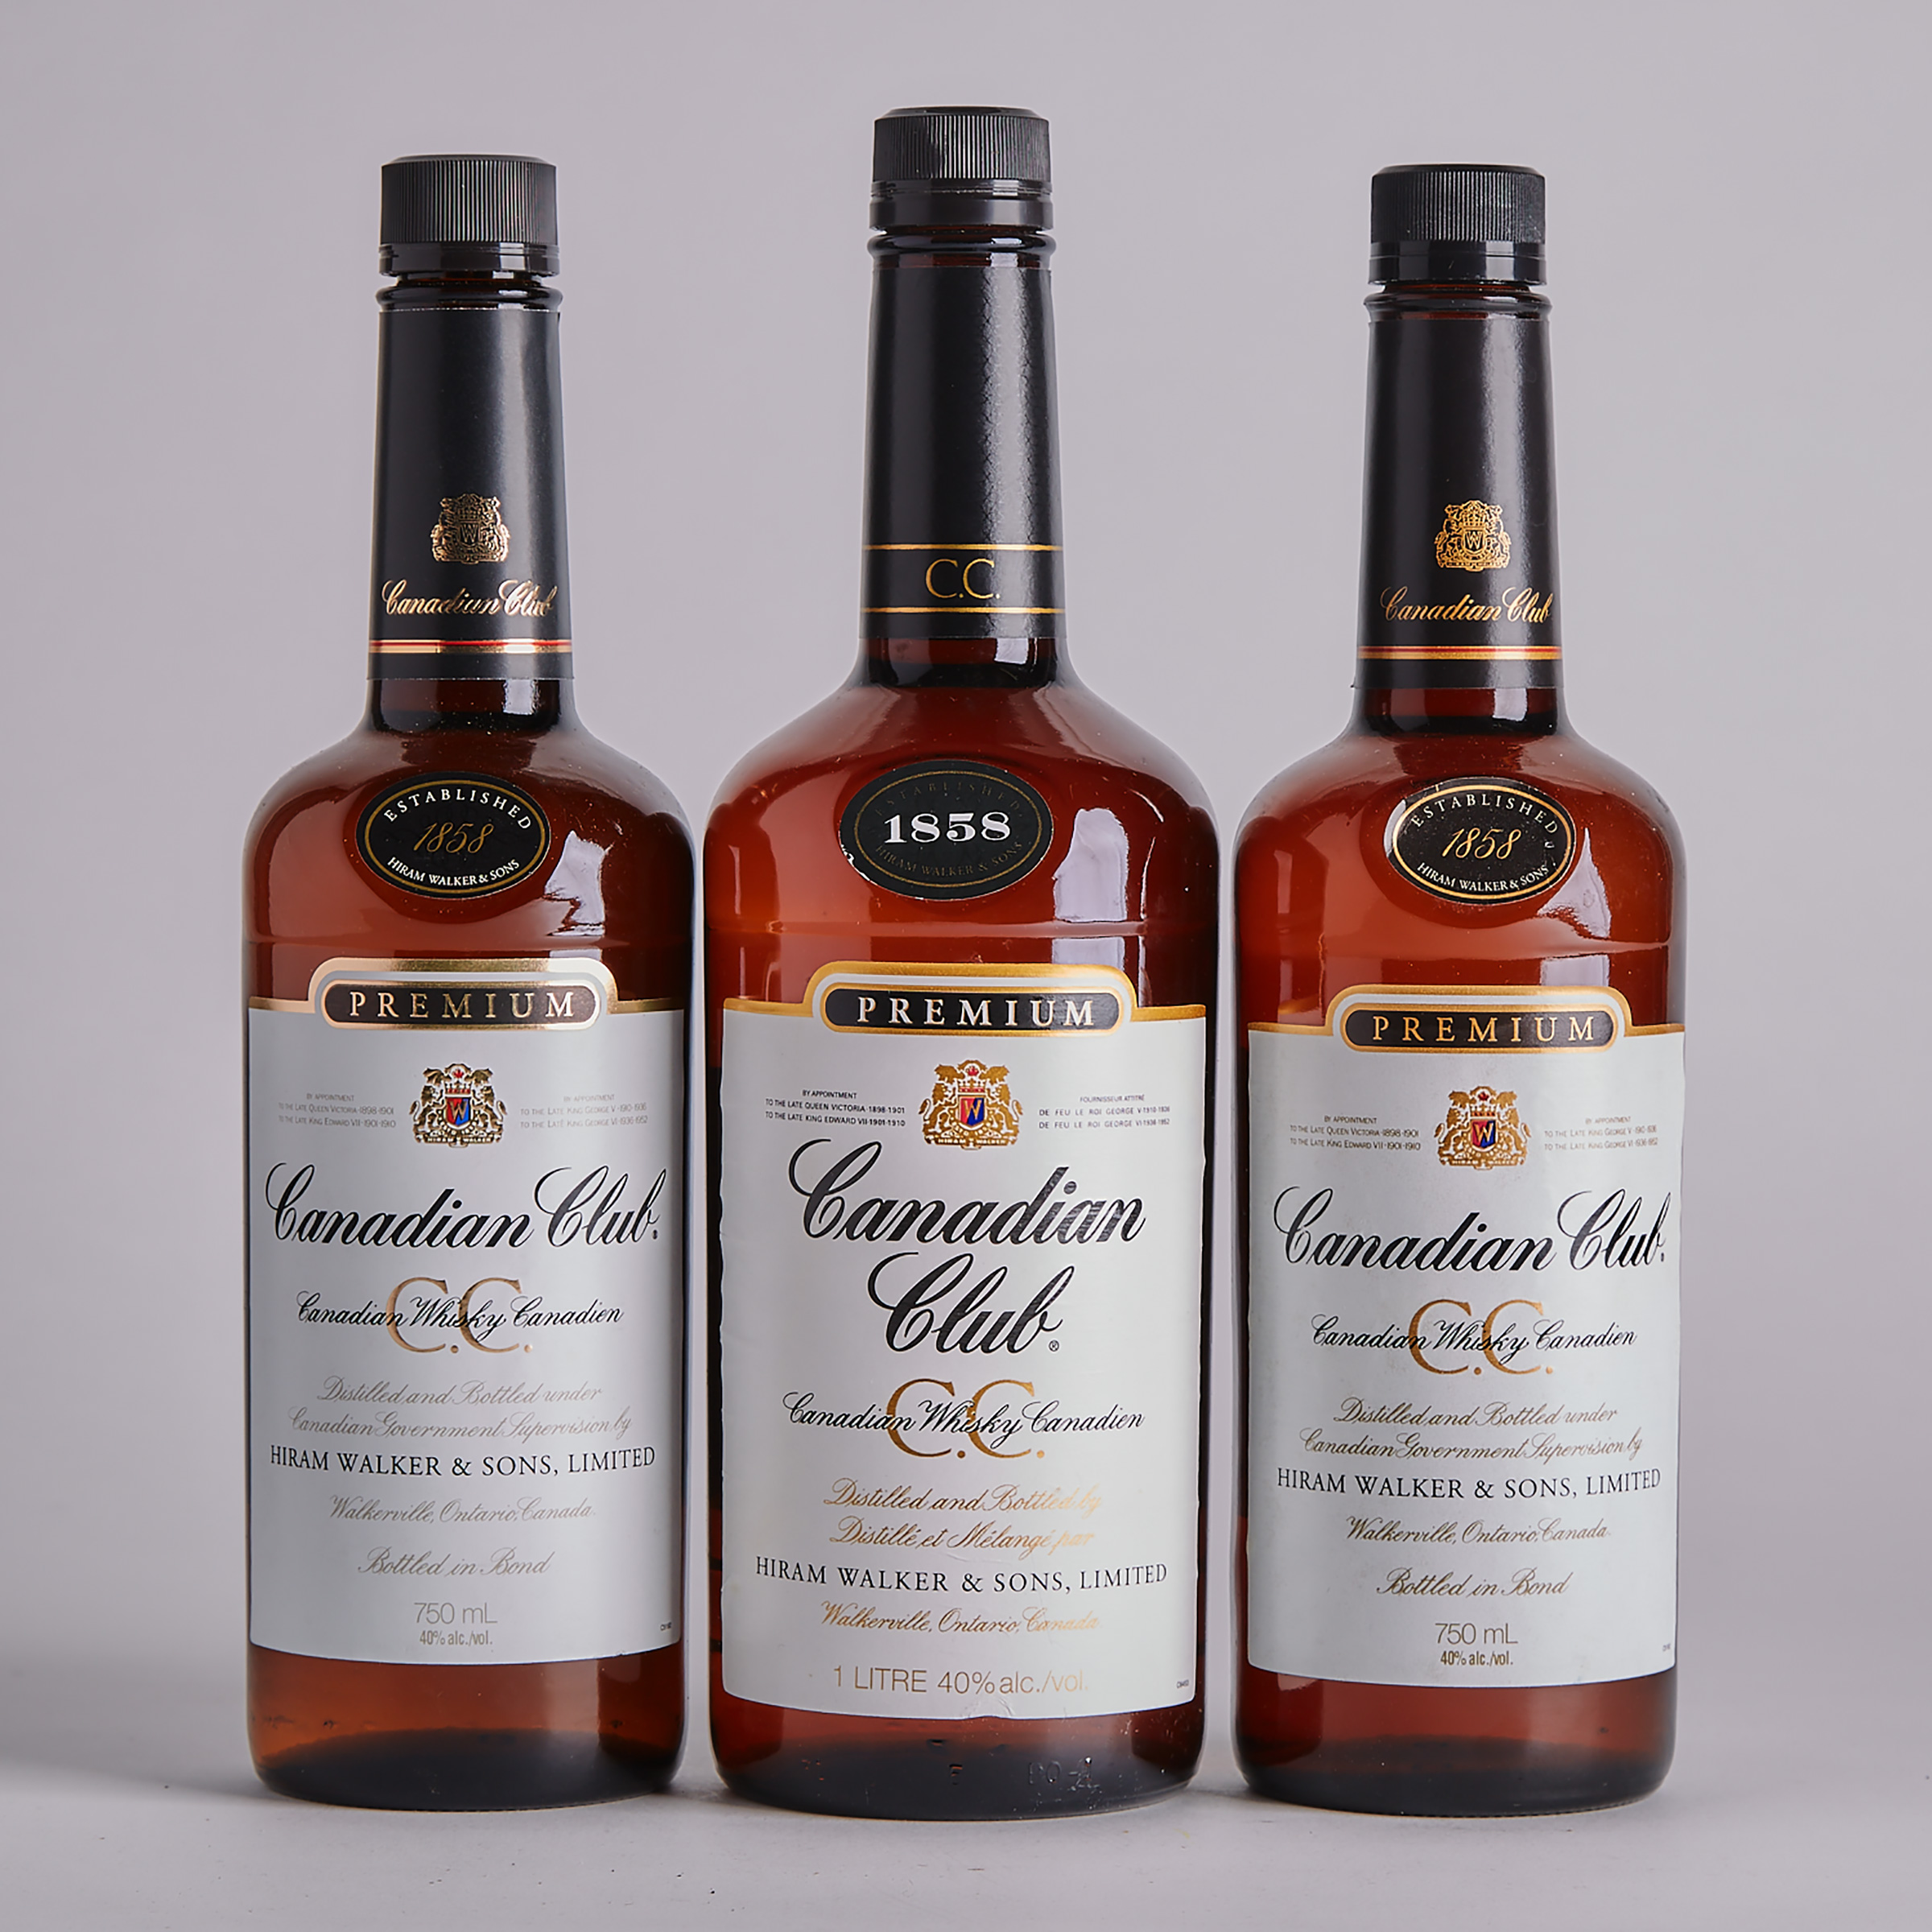 CANADIAN CLUB PREMIUM CANADIAN WHISKY (ONE 1000 ML)
CANADIAN CLUB PREMIUM CANADIAN WHISKY (ONE 750 ML)
CANADIAN CLUB PREMIUM CANADIAN WHISKY (ONE 750 ML)